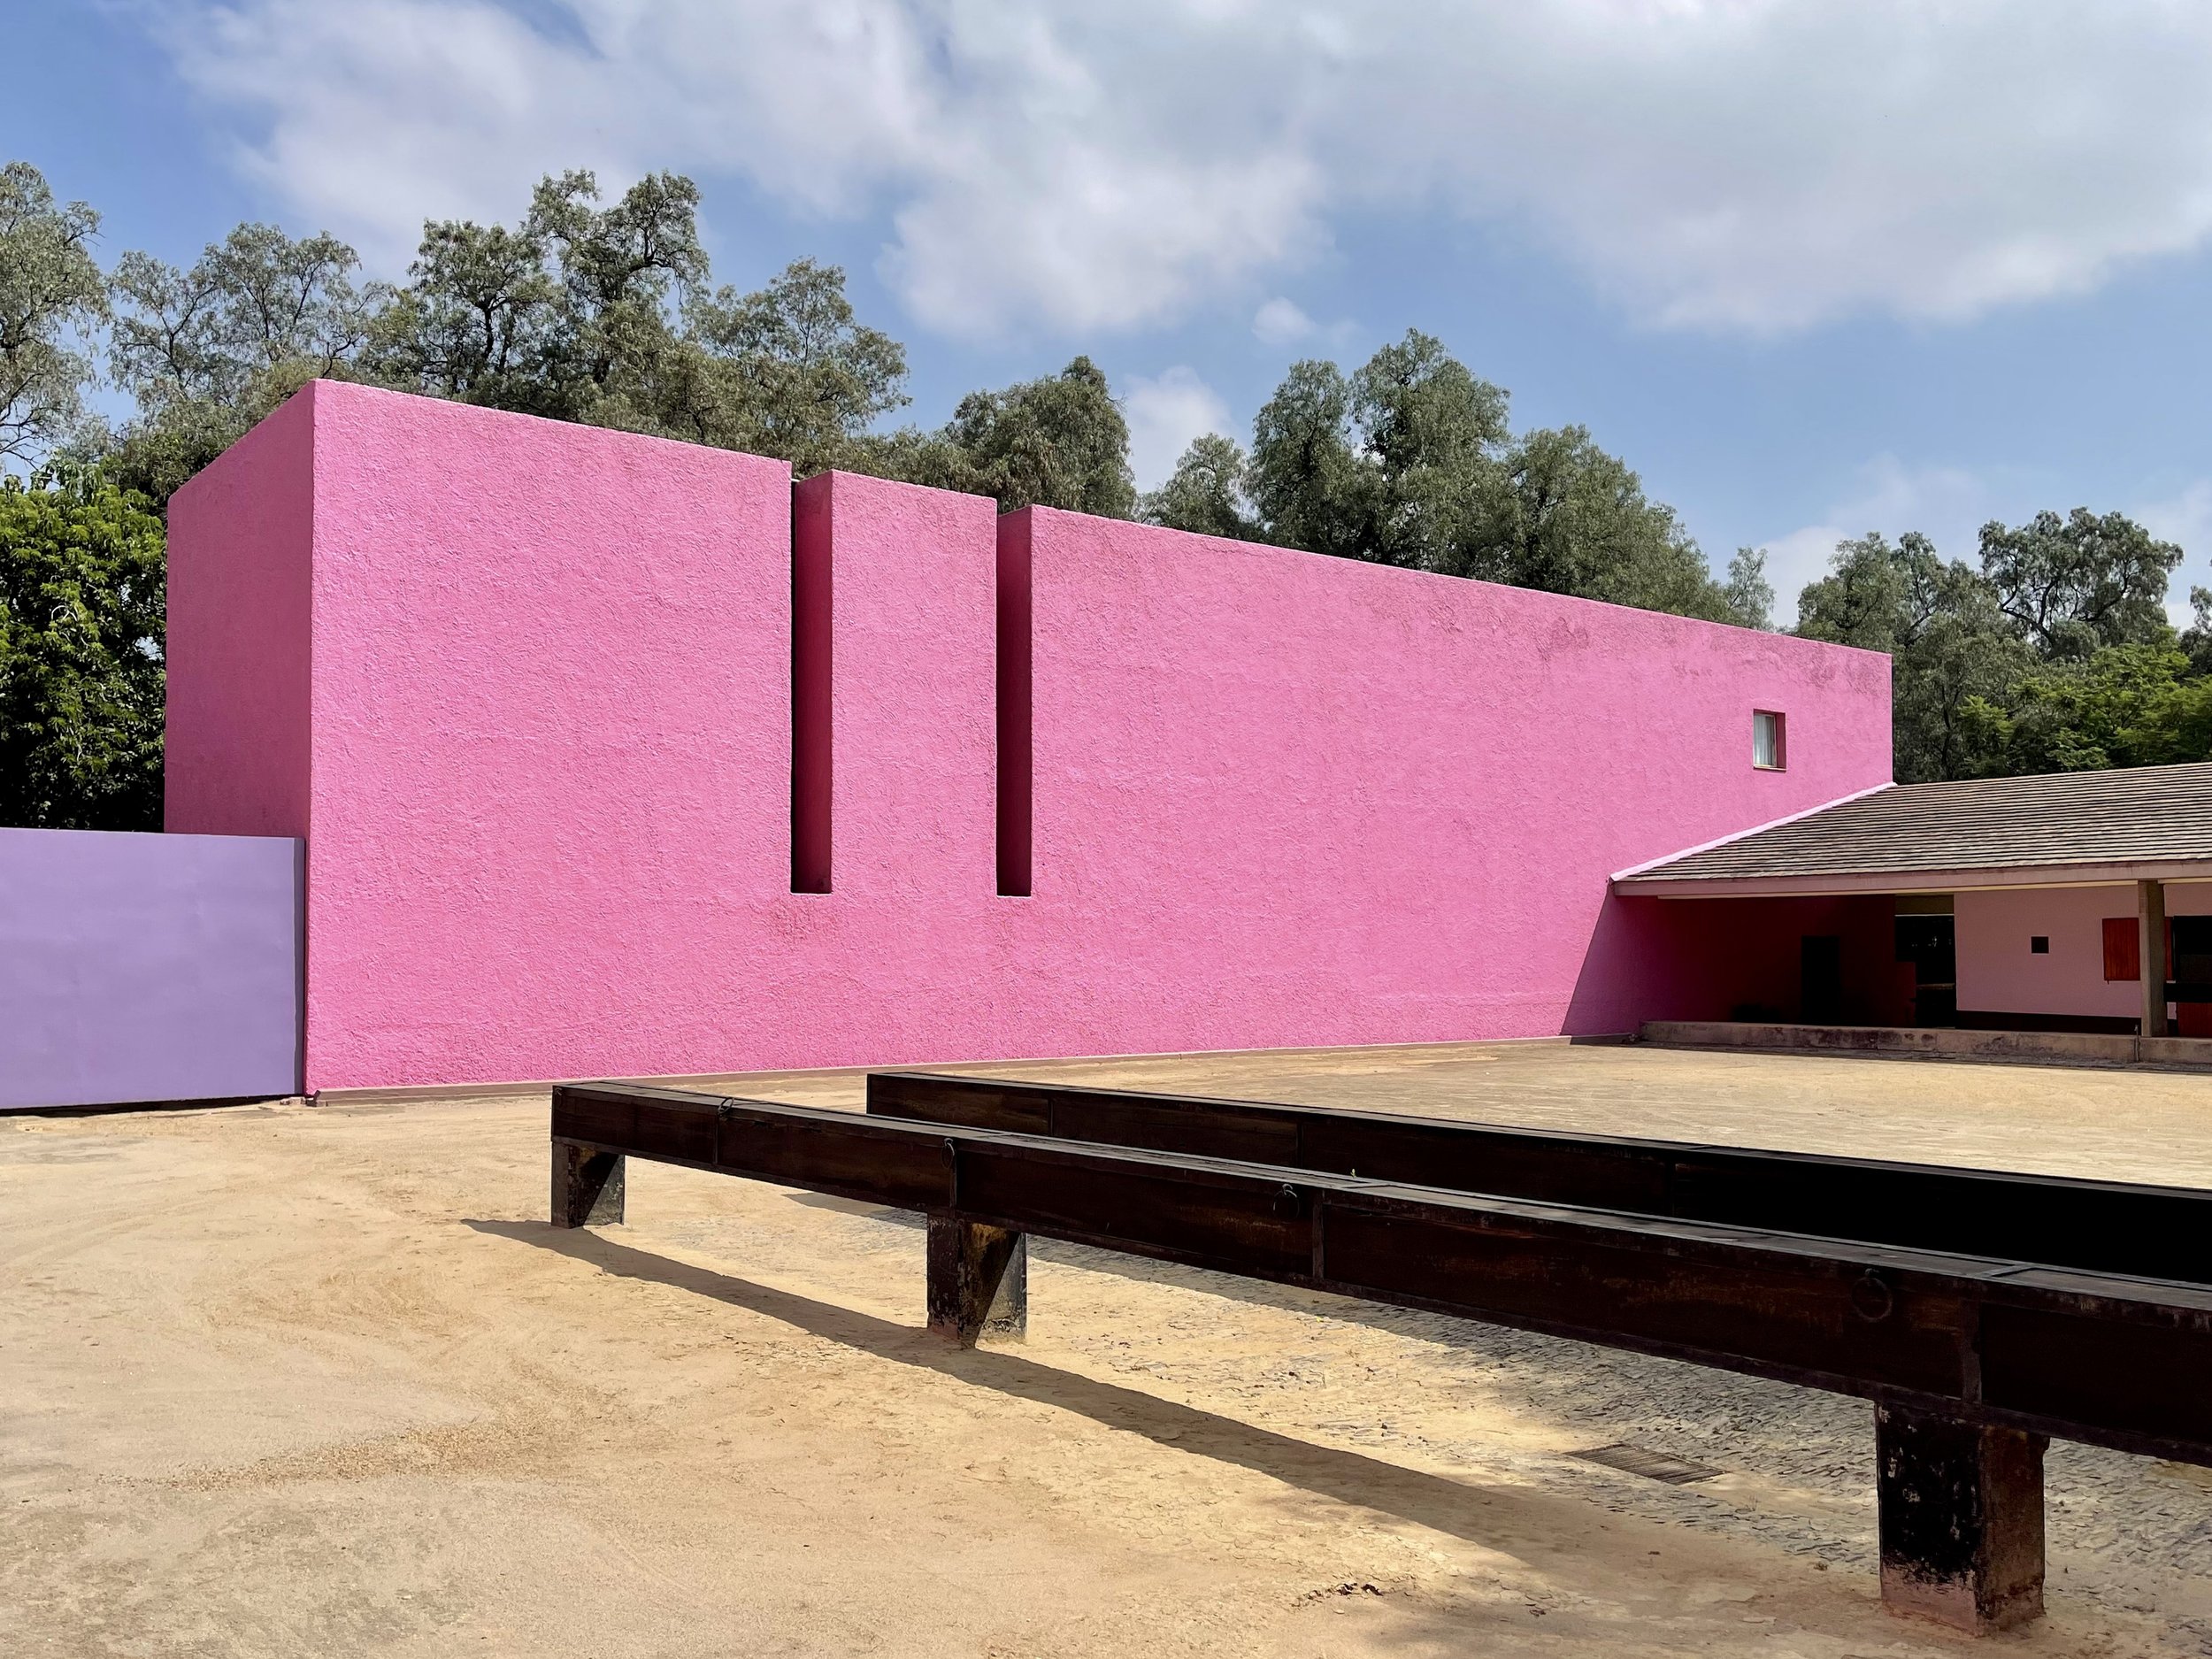 Where to find Luis Barragan works in Mexico City - AFAR